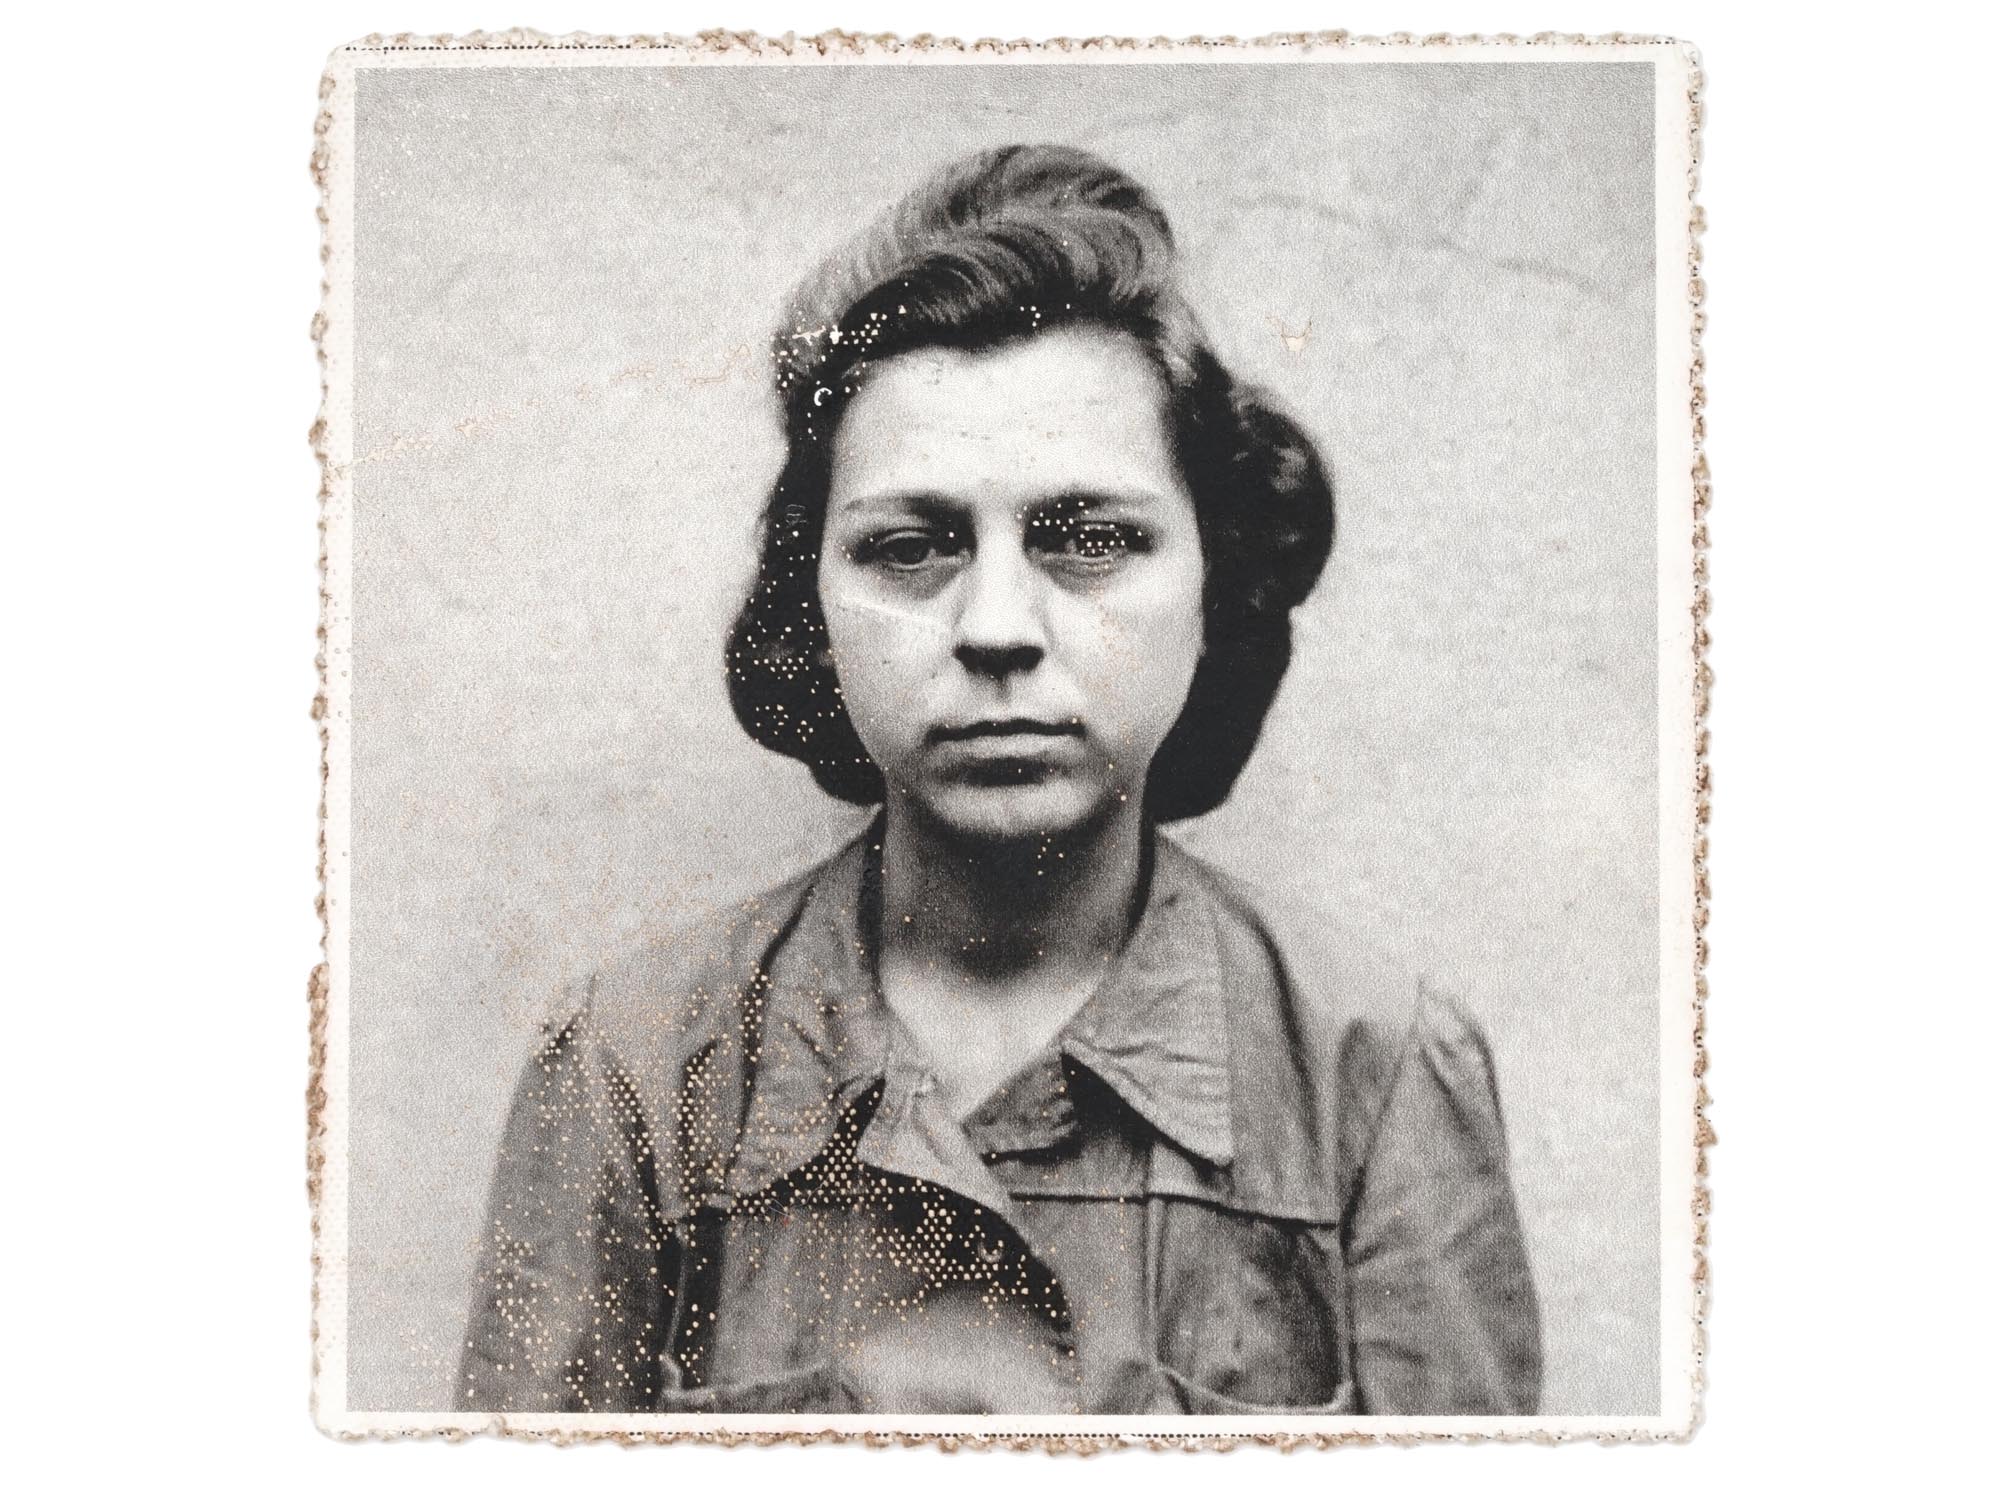 NUREMBERG TRIAL PHOTO OF CAMP GUARD ILSE FORSTER PIC-0